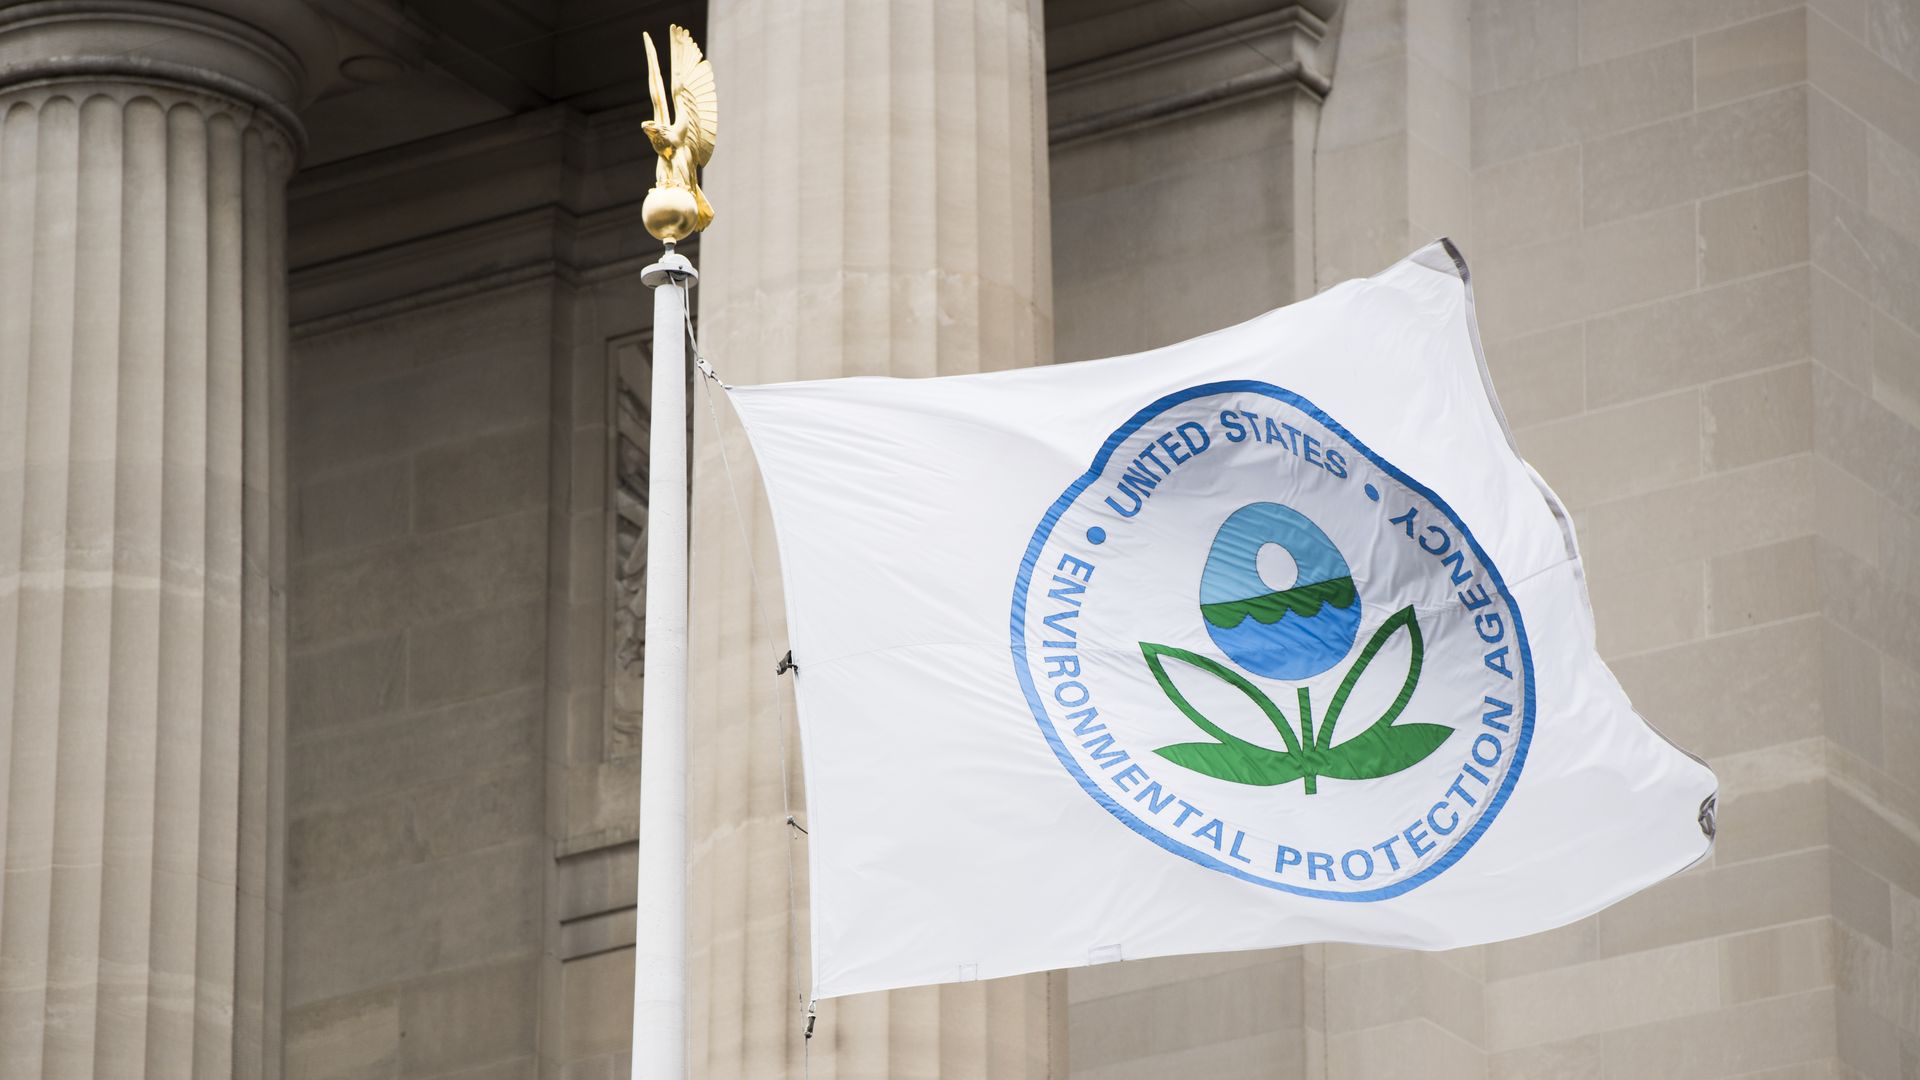 In this image, the EPA logo is displayed on a flag in front of a pillared federal building.